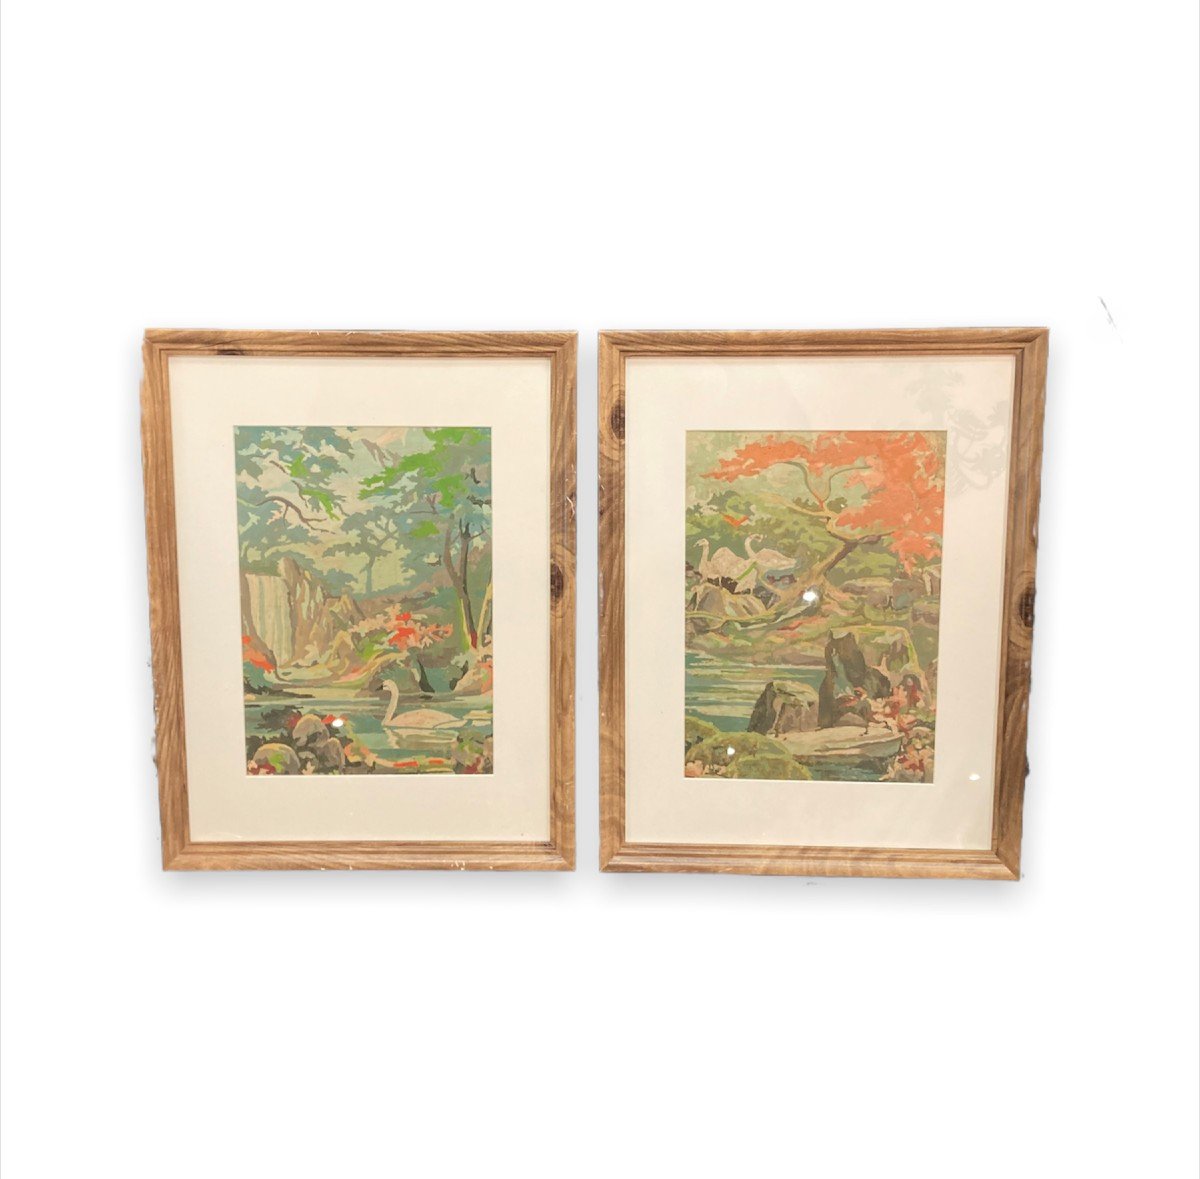 Pair Of Study Cards For The Decor Of "lac Des Cygnes" - Signed Kopanievesky